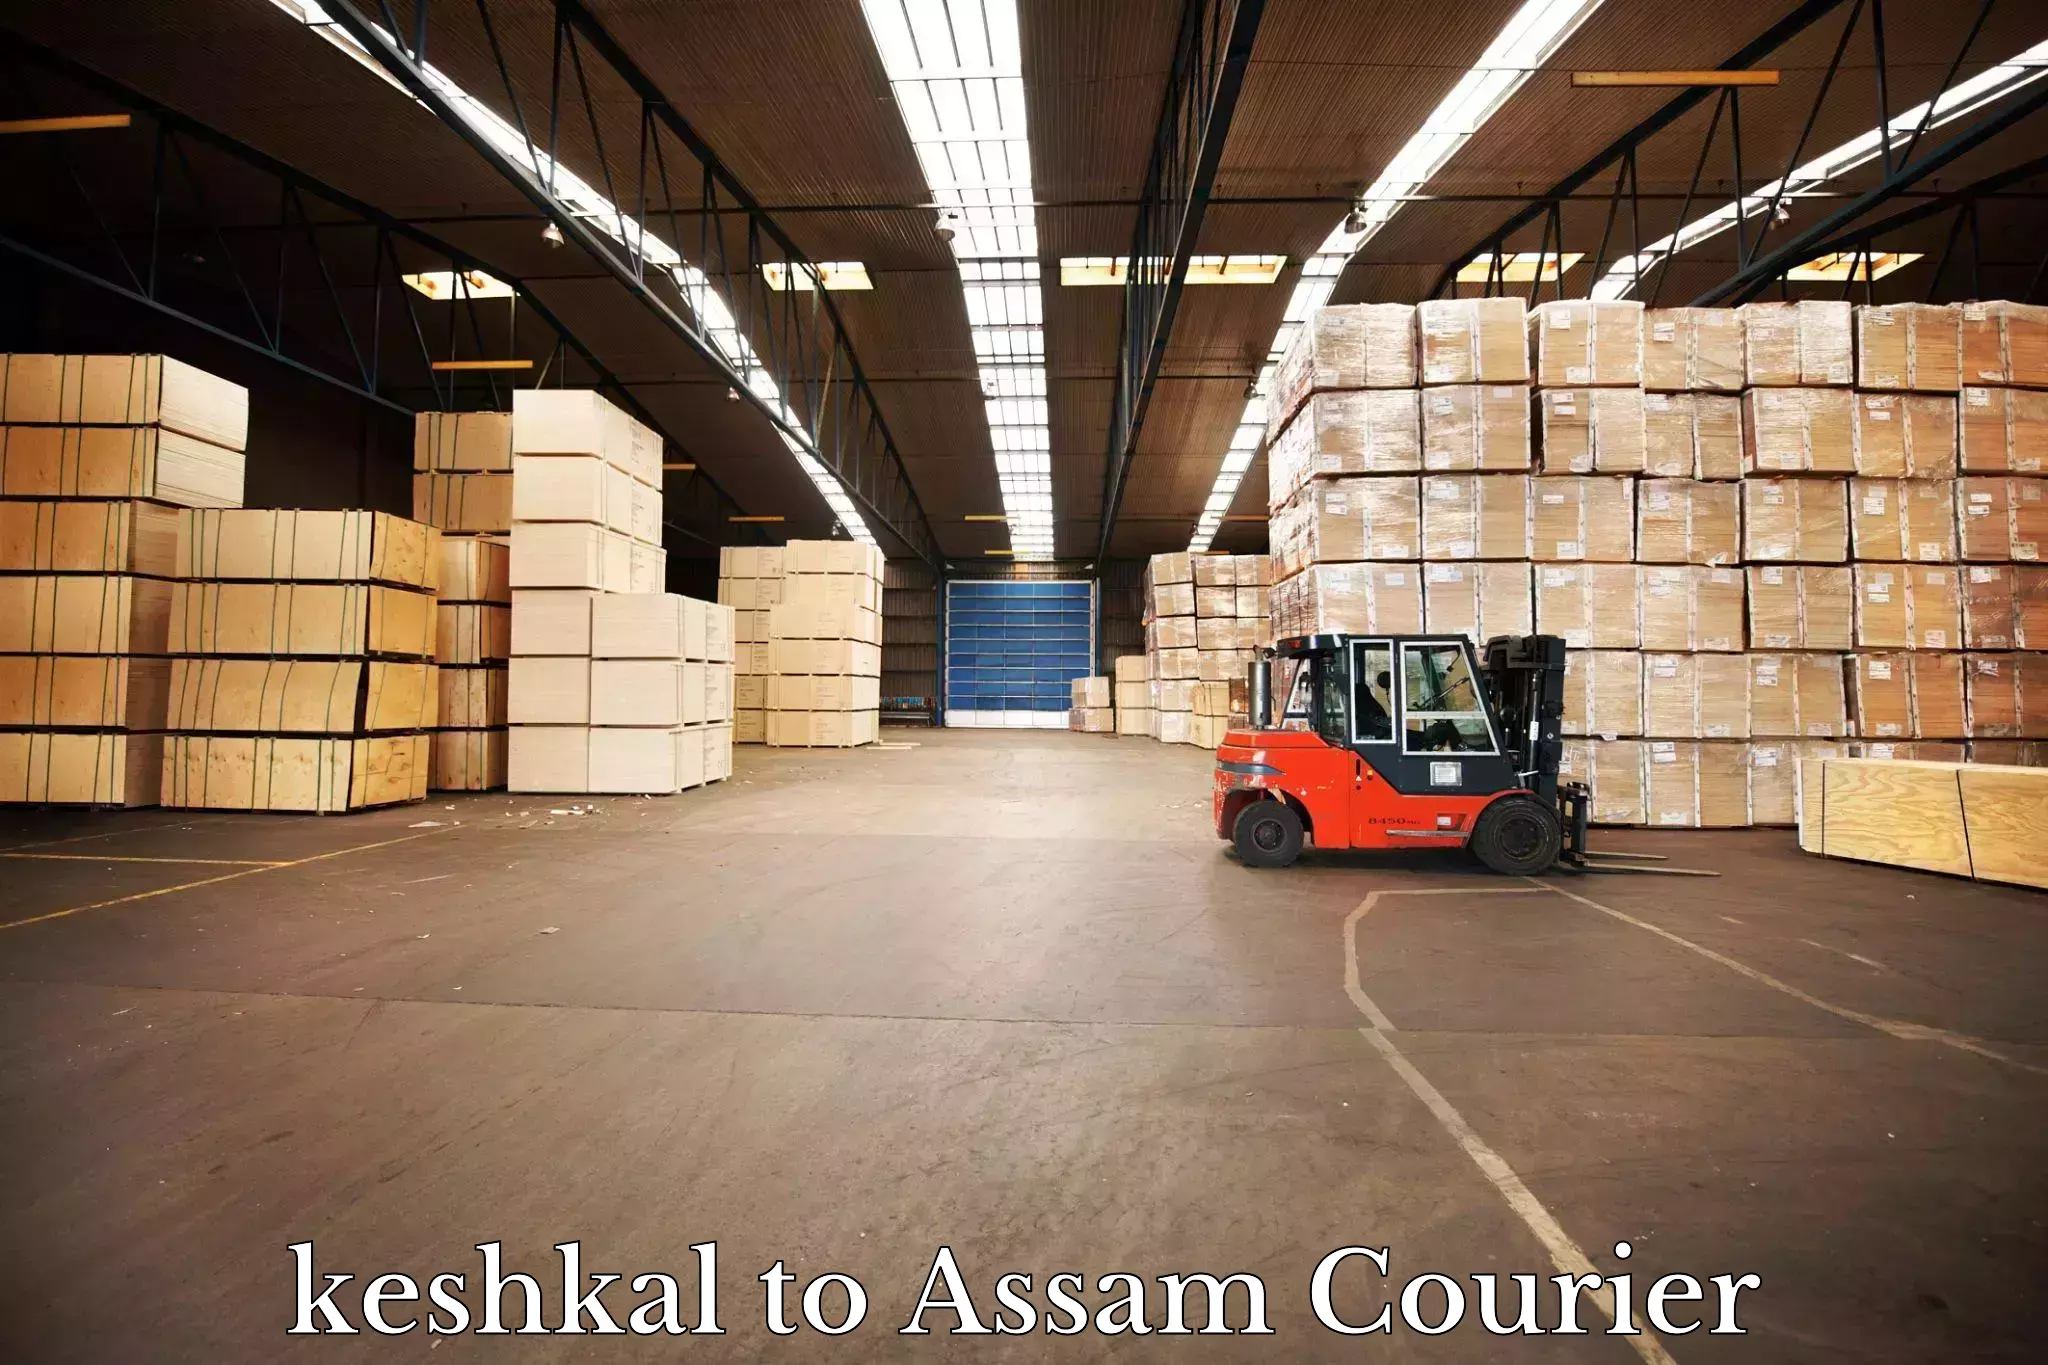 Express mail solutions keshkal to Assam